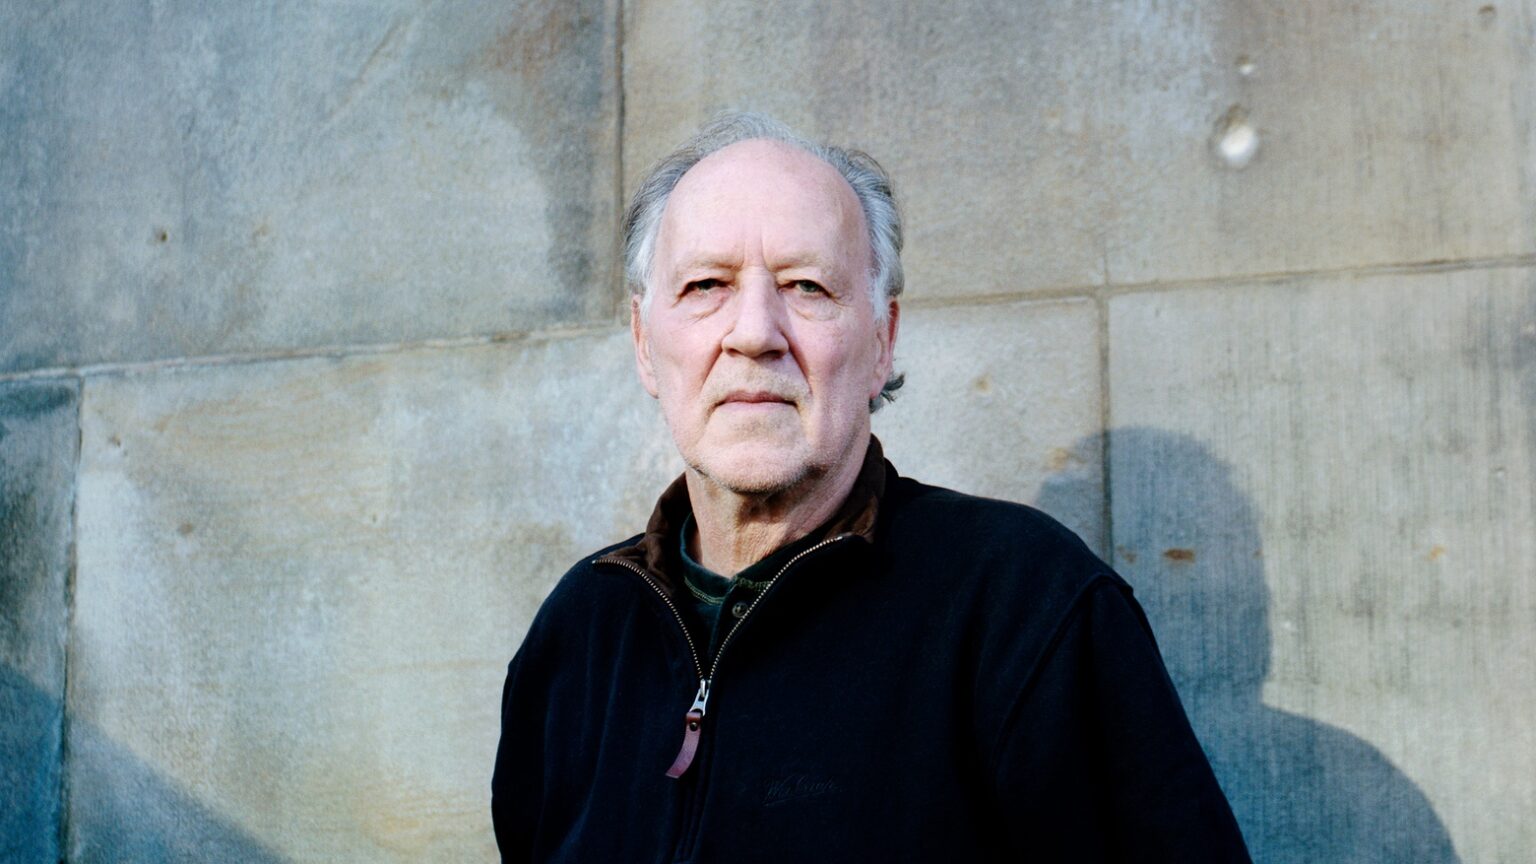 Werner Herzog is one of the greatest living filmmakers, and he’s co-directing Fireball for Apple TV+.